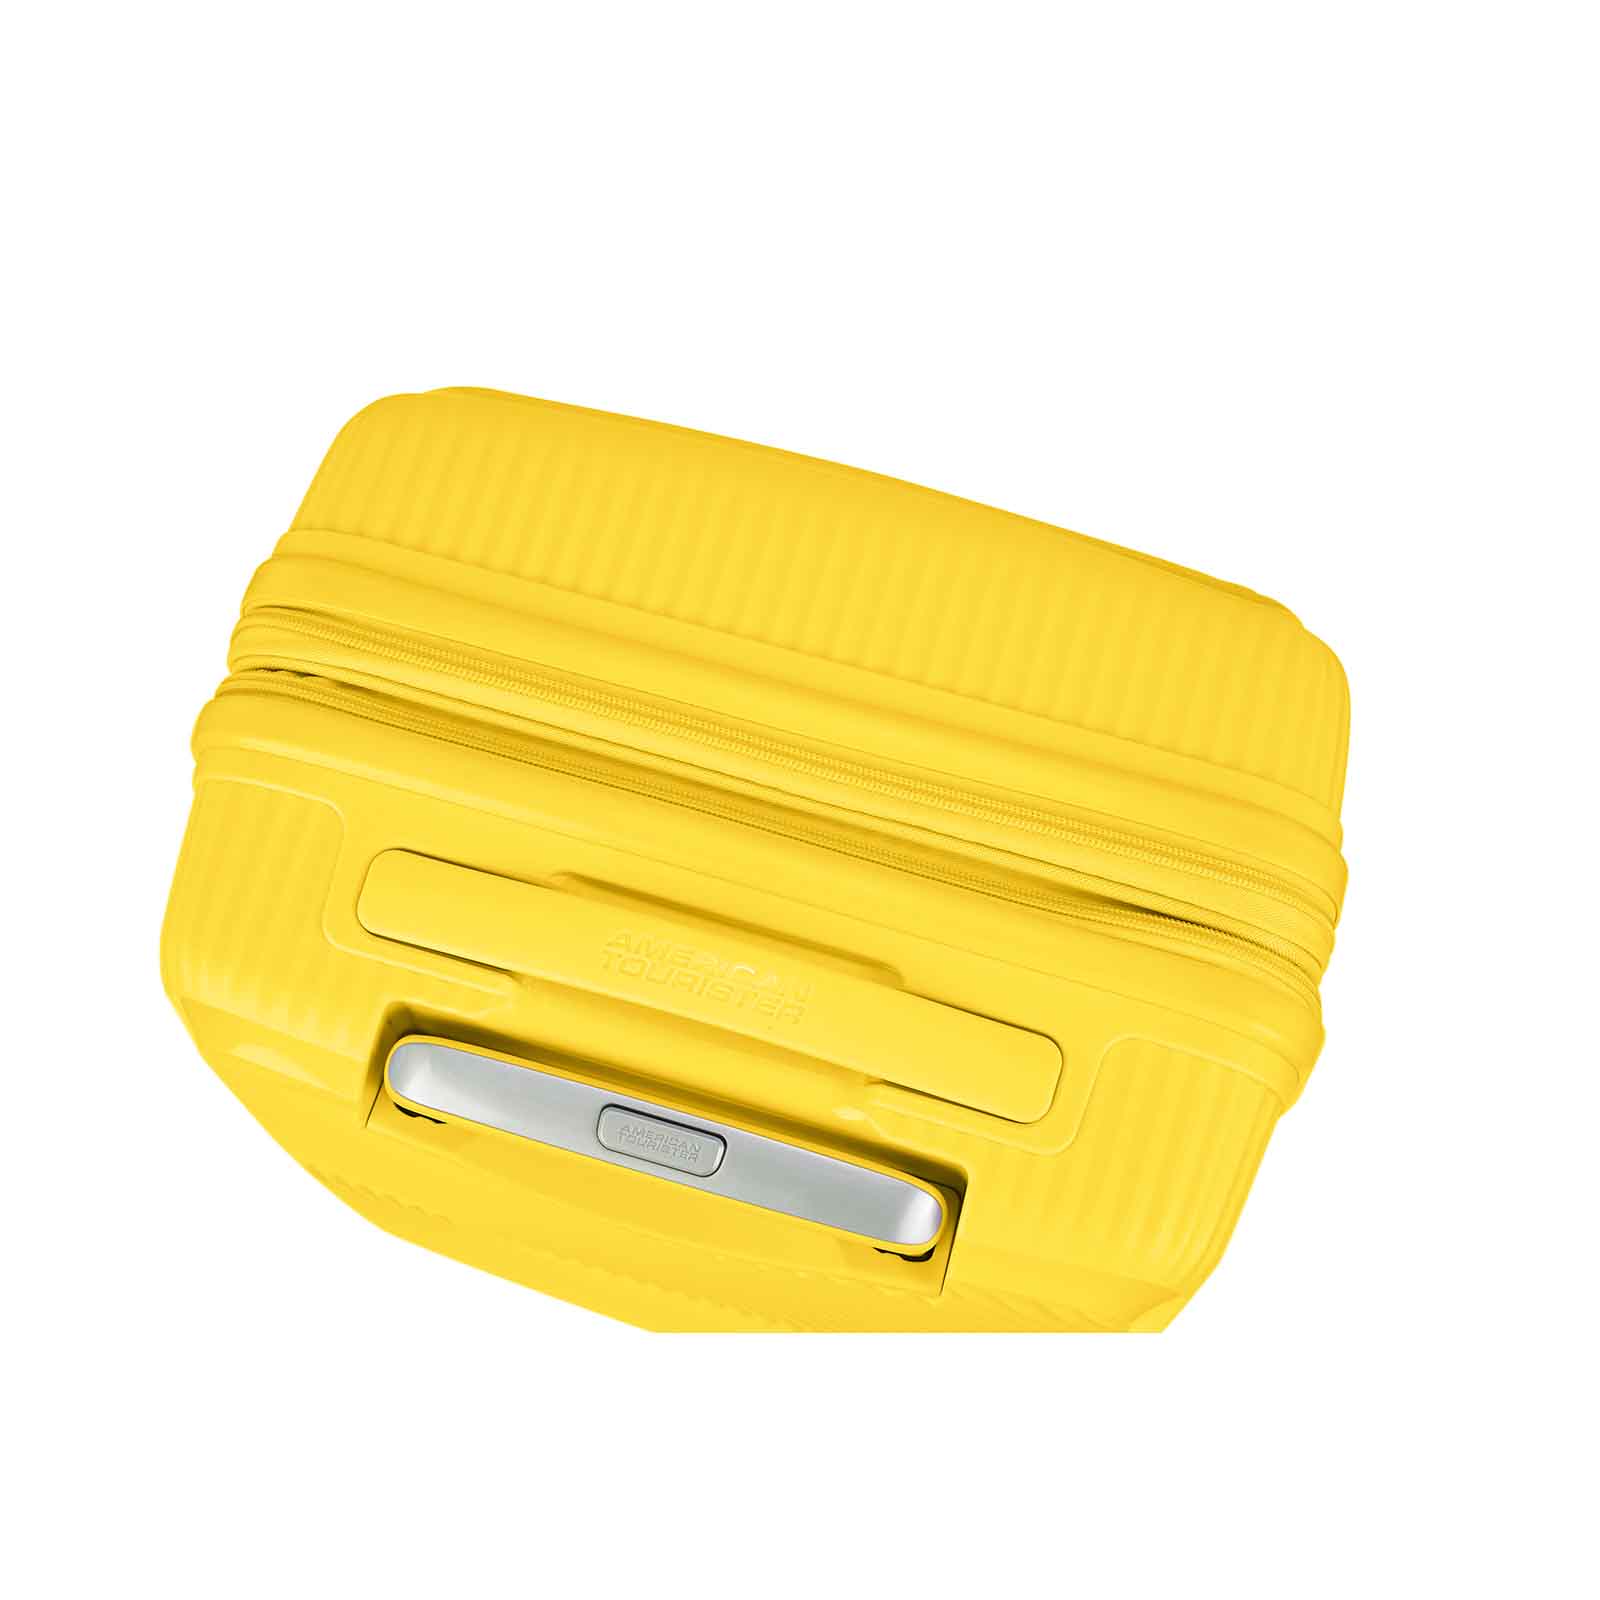 American-Tourister-Curio-2-55cm-Carry-On-Suitcase-Golden-Yellow-Handle